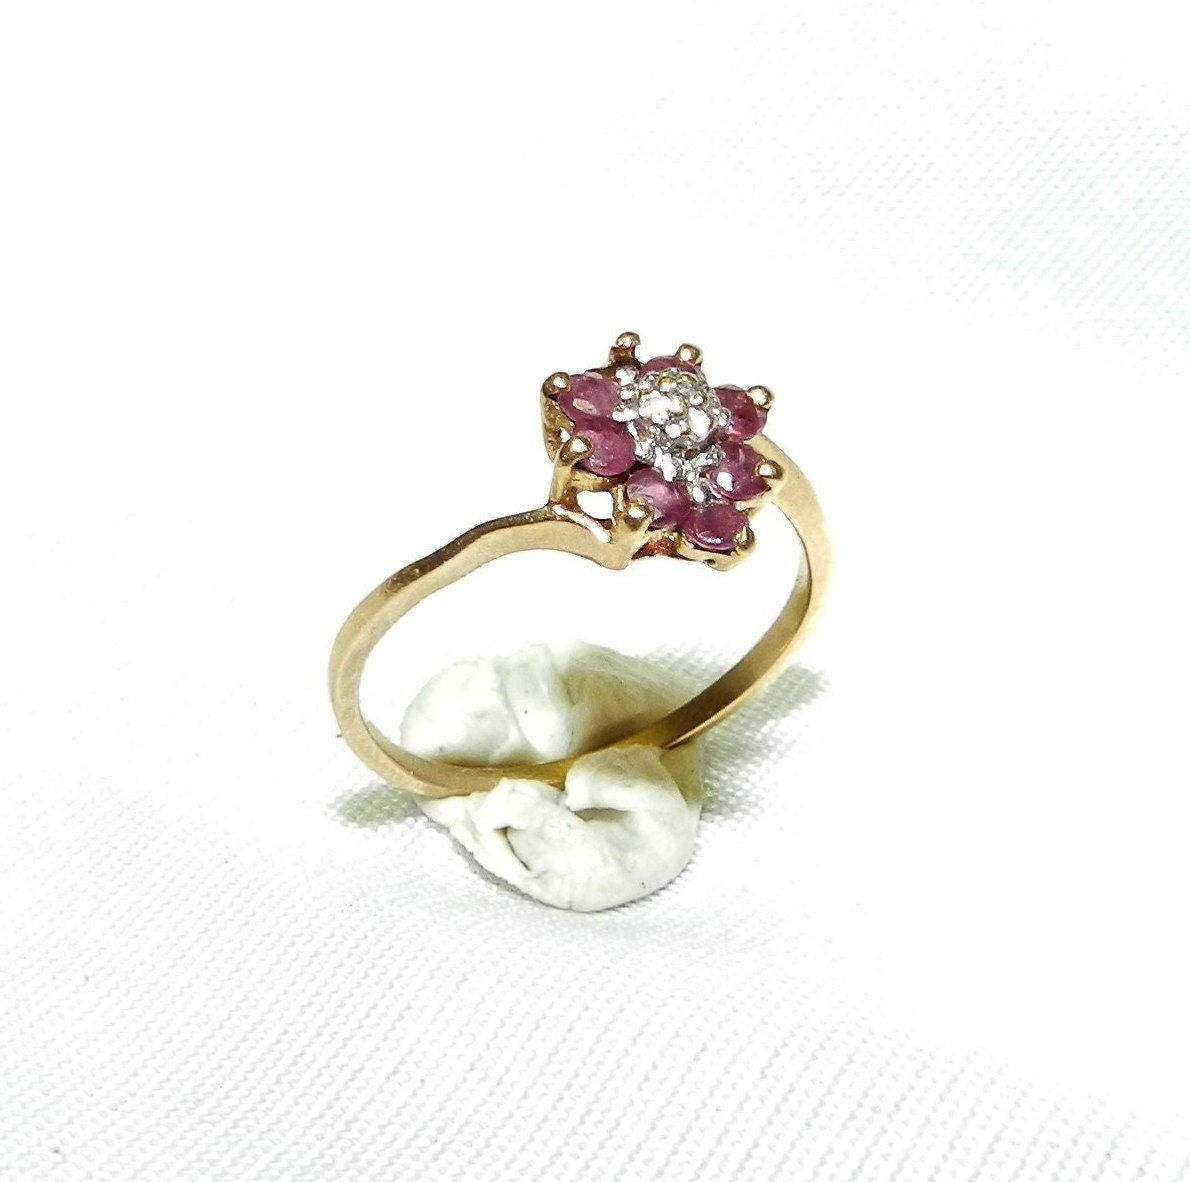 Vintage 10K Gold Red Spinel & Diamond Ring -  Damaged - Repair Resell